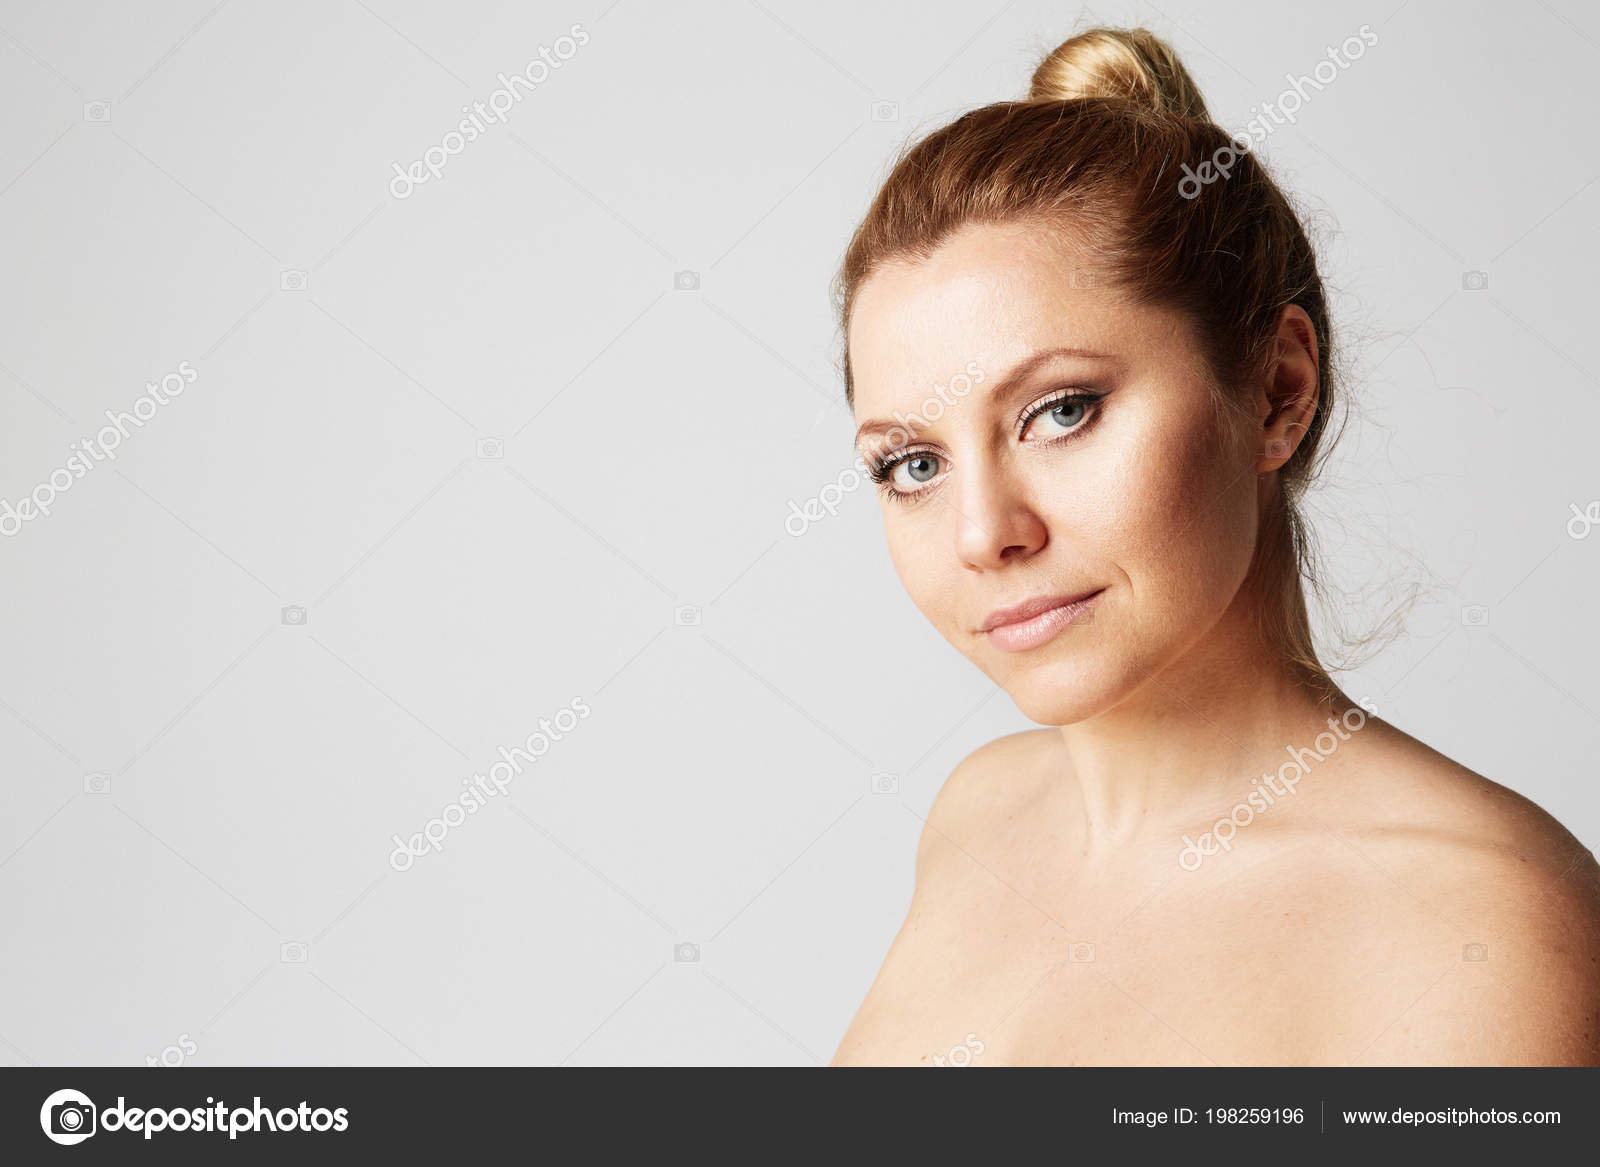 Young Beautiful Woman With Blonde Hair Fixed Behind Big Eyes